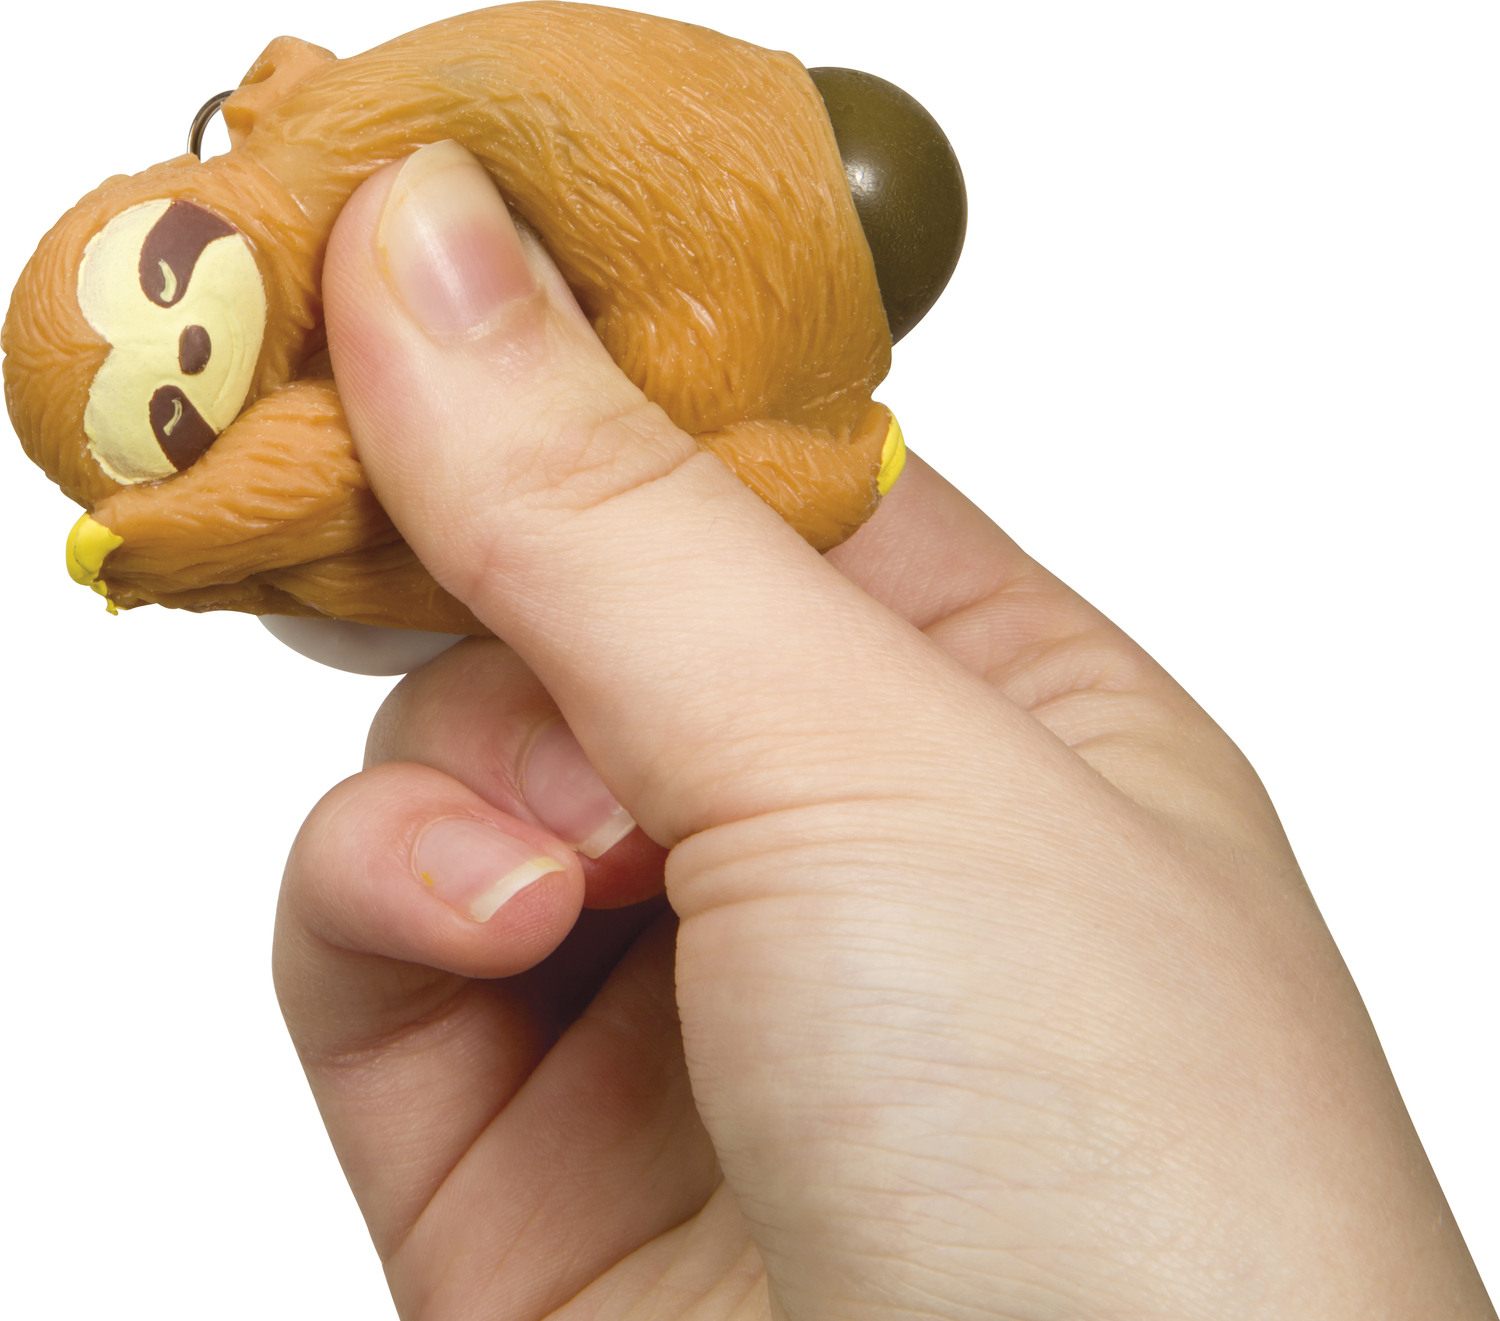 Squeeze and Poop Sloth Keychain